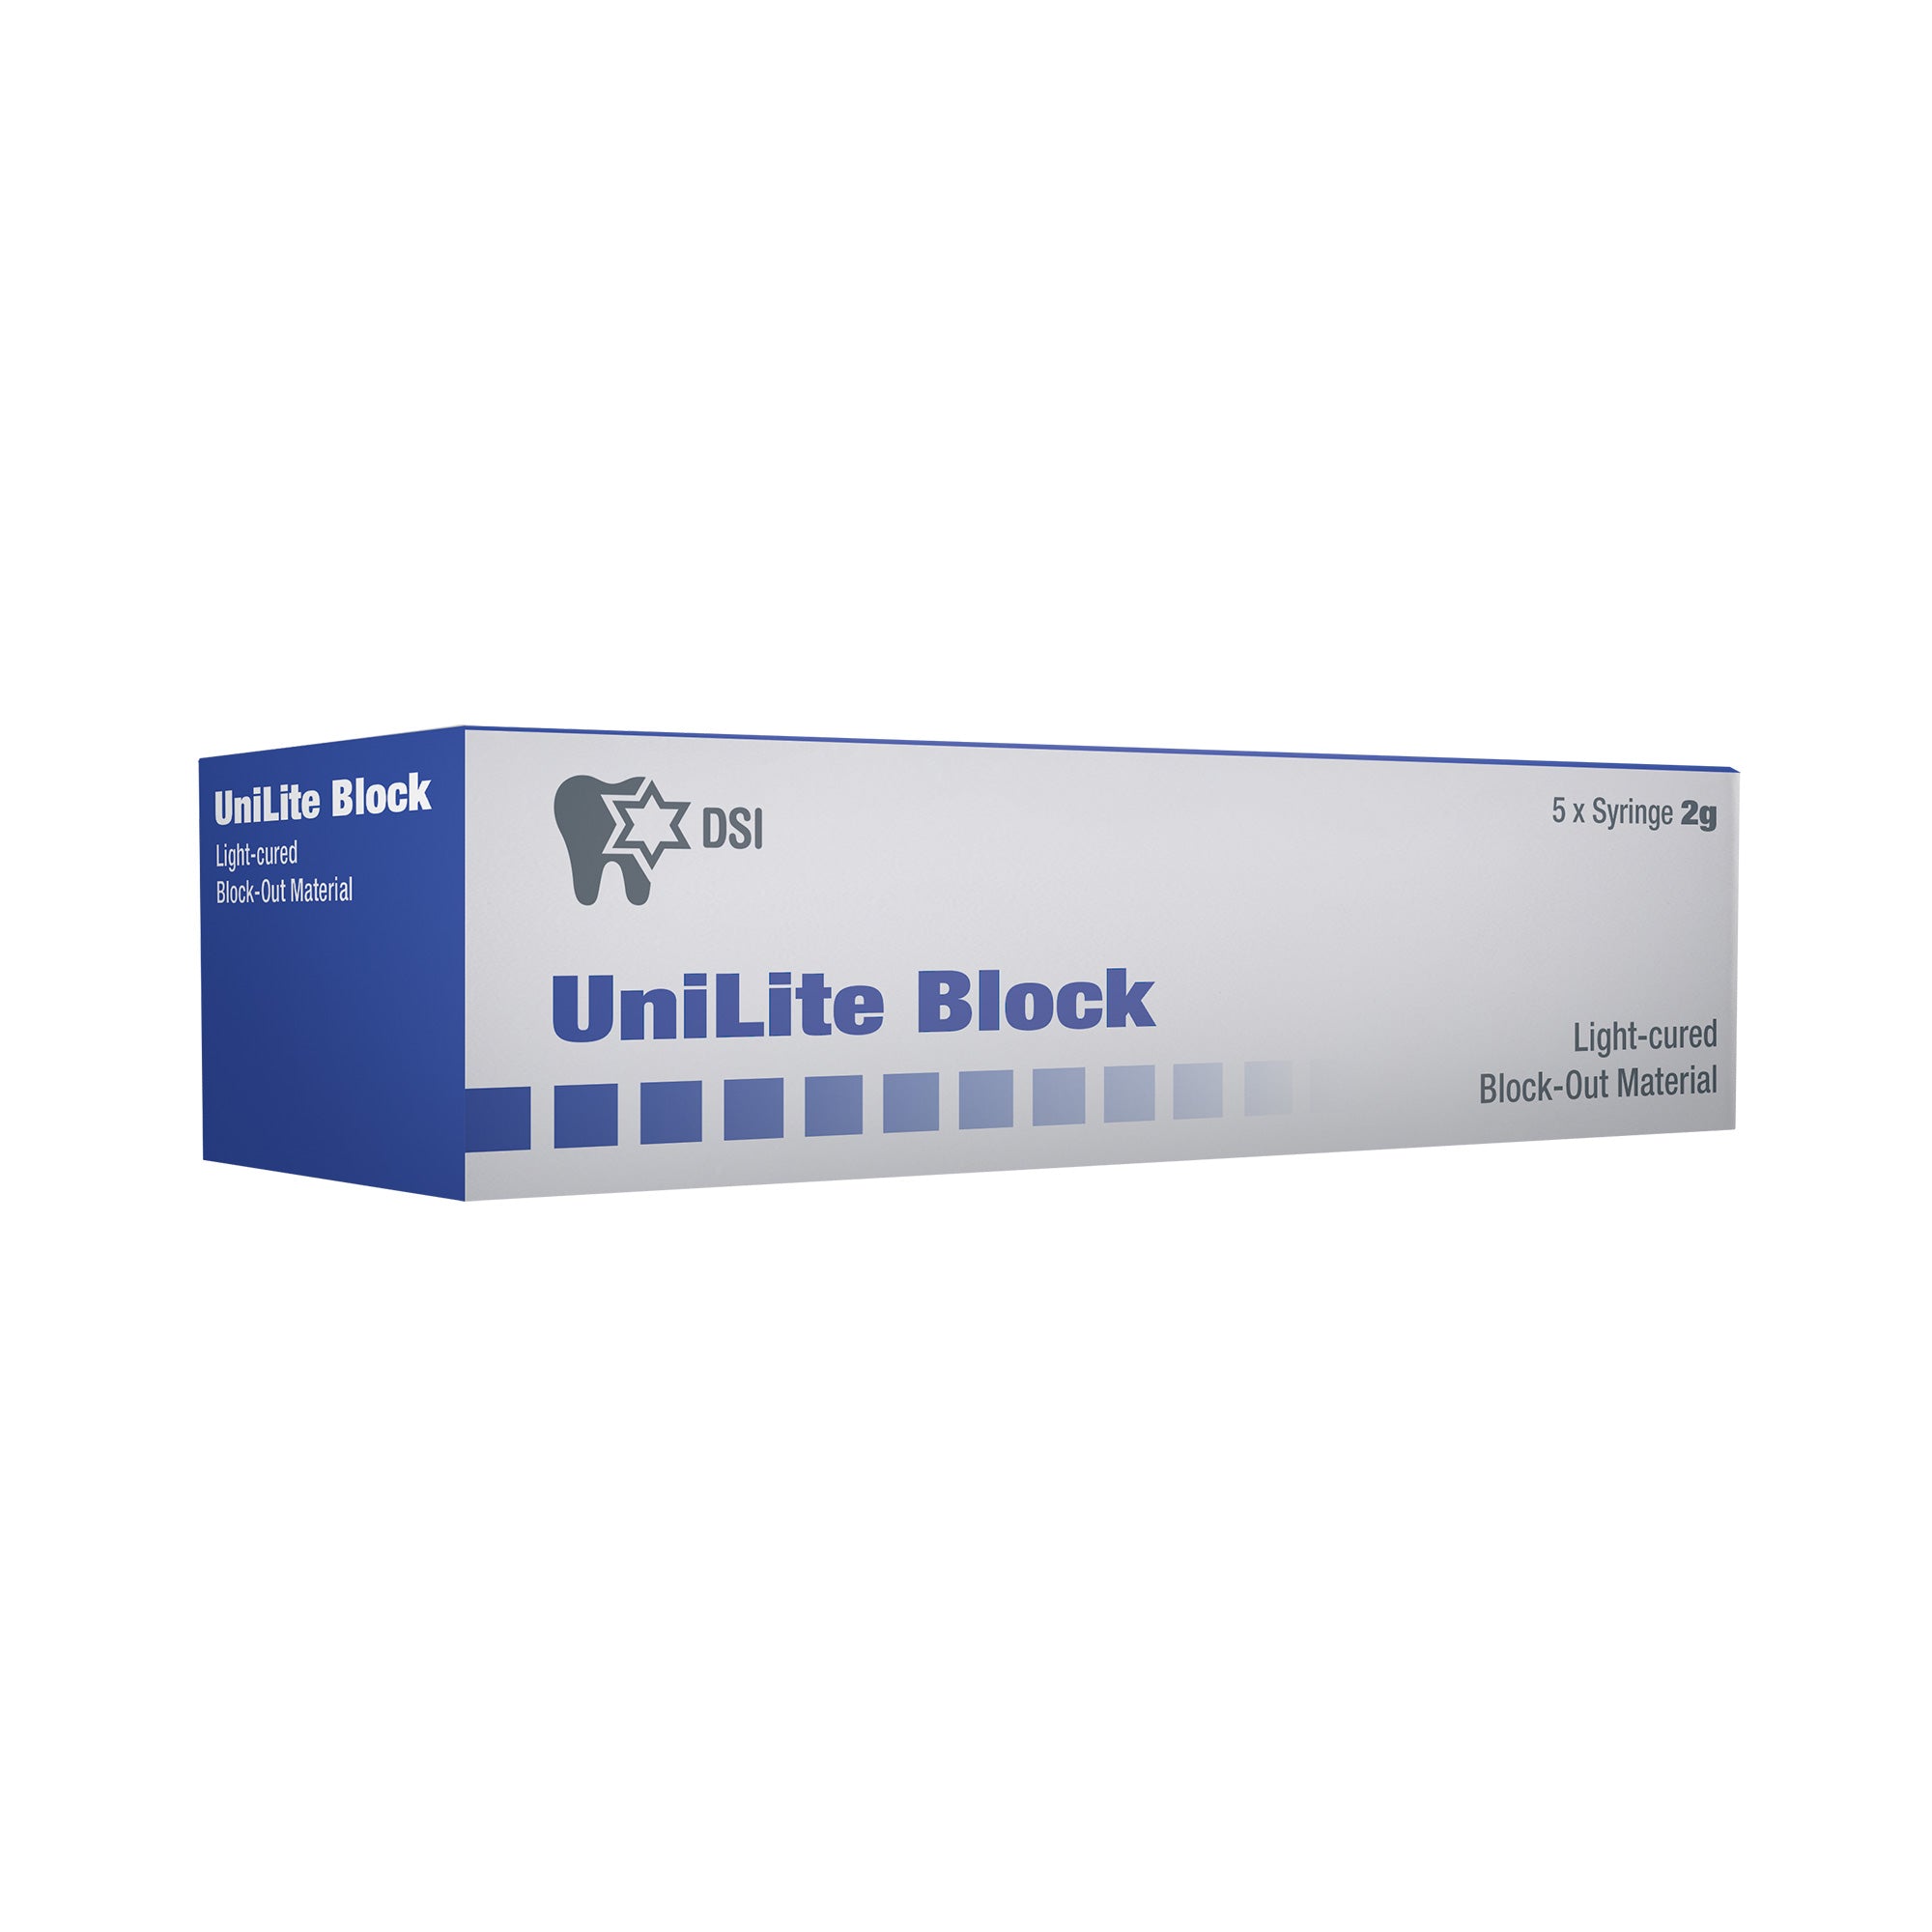 DSI UniLite Block-Out Resin Material 5x Syringes 2g each